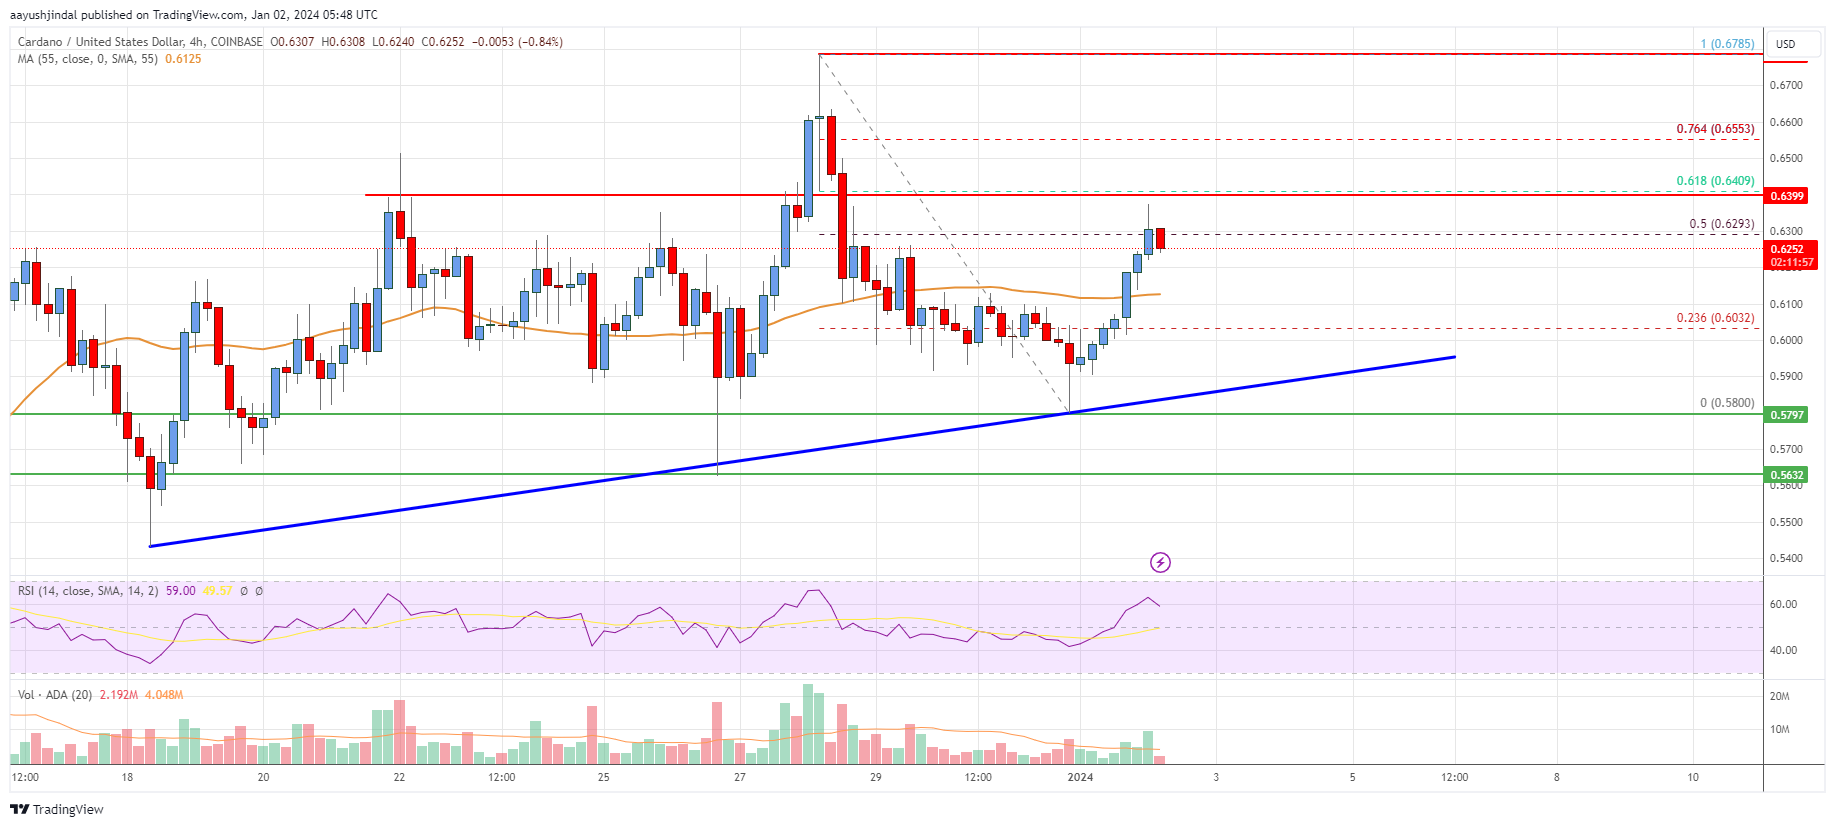 Cardano (ADA) Price Analysis: Can It Rally Above This Hurdle?